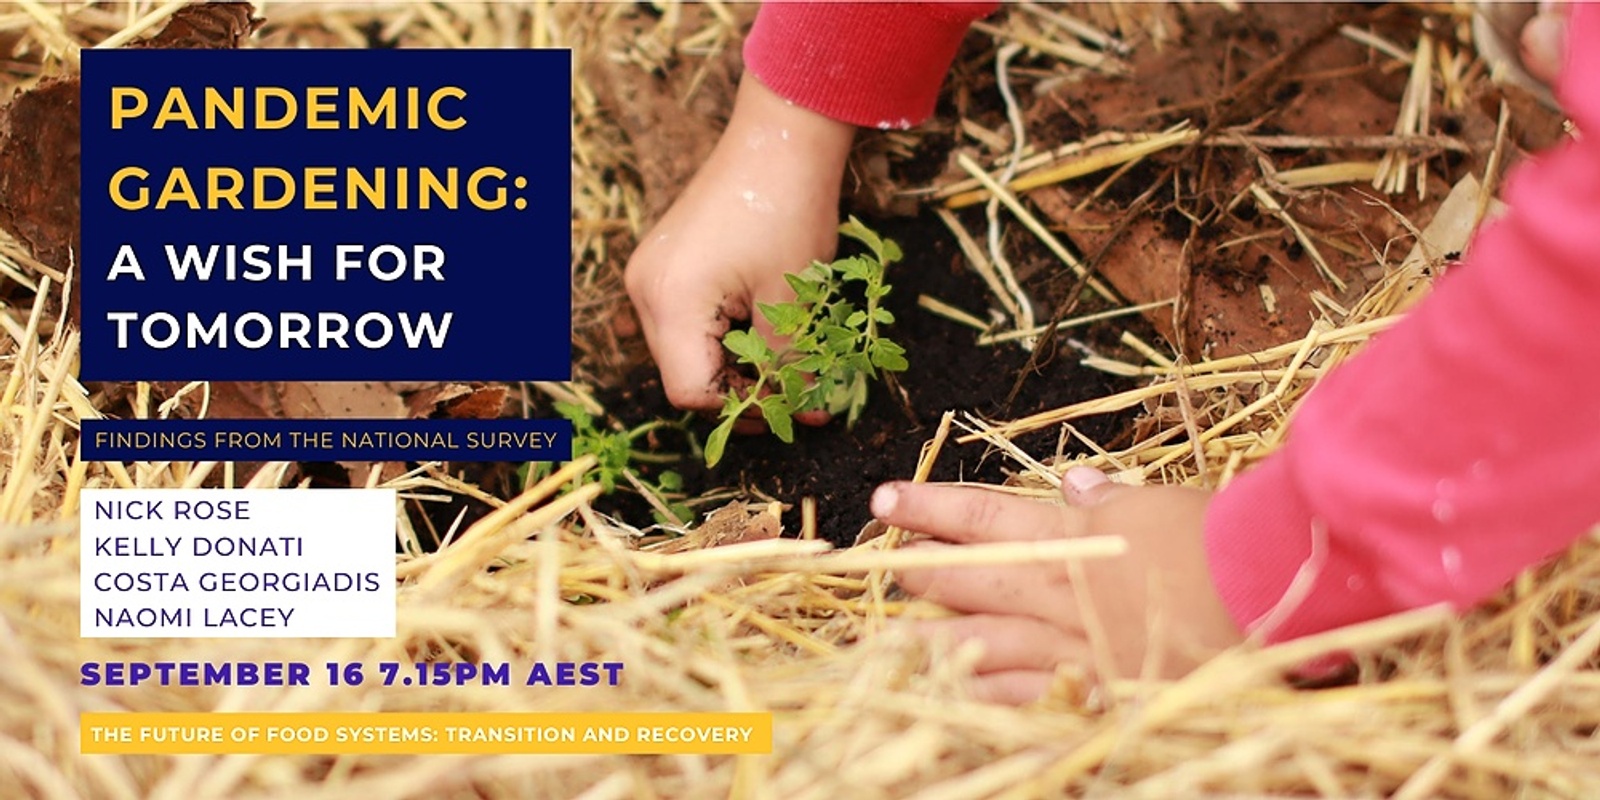 Banner image for Pandemic Gardening: "A Wish for Tomorrow": Findings from the National Survey